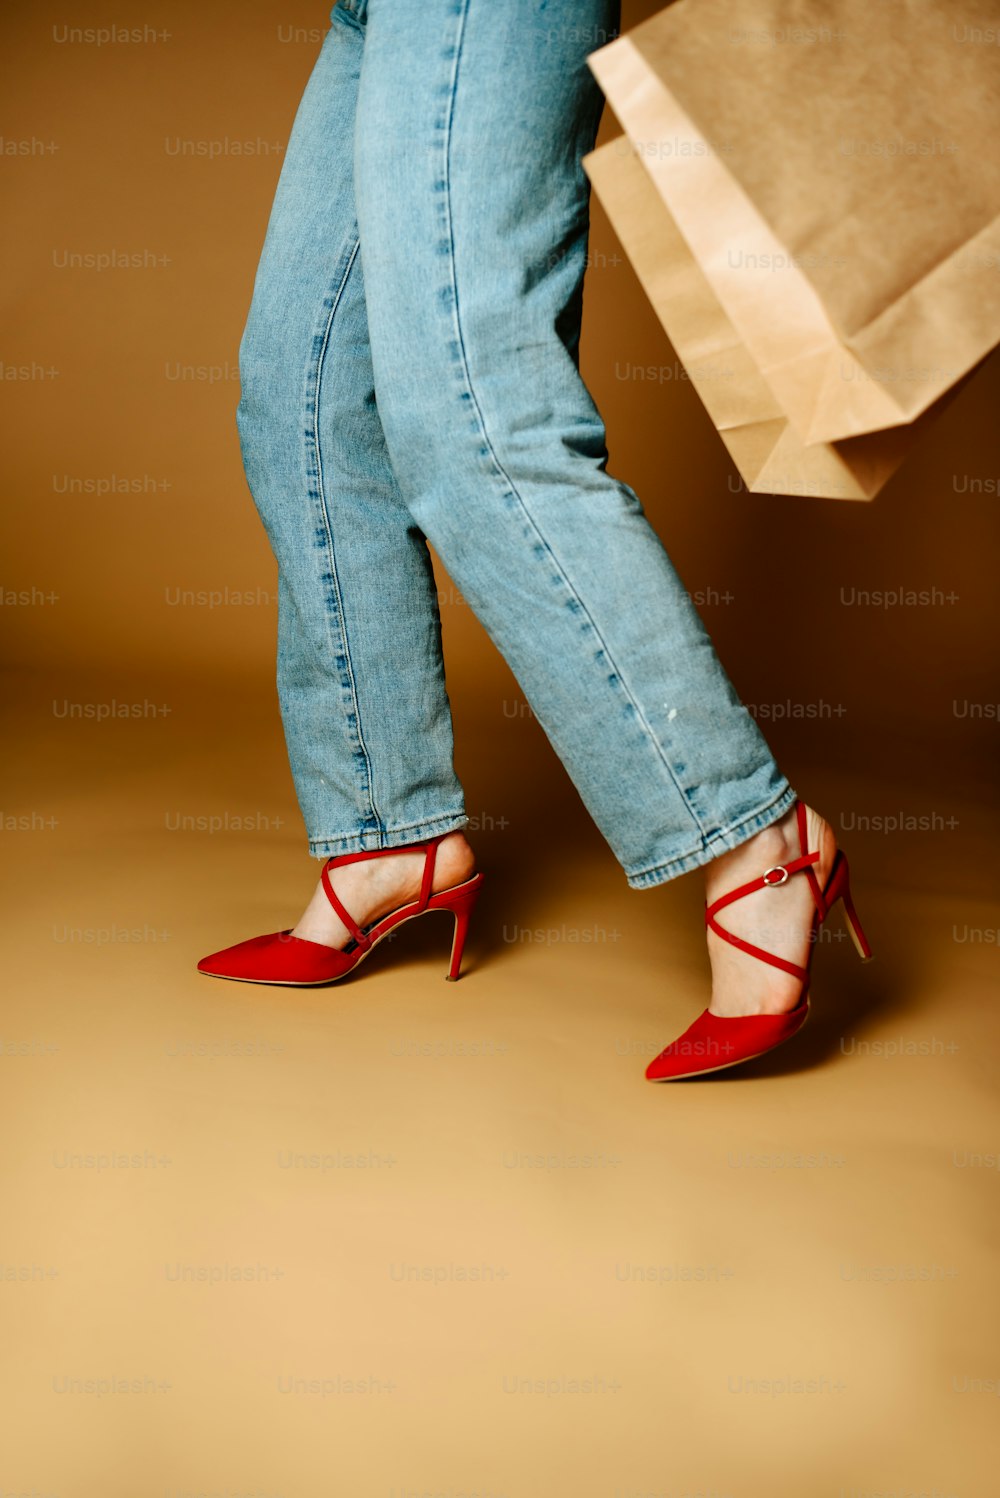 a woman's legs in high heels holding a shopping bag